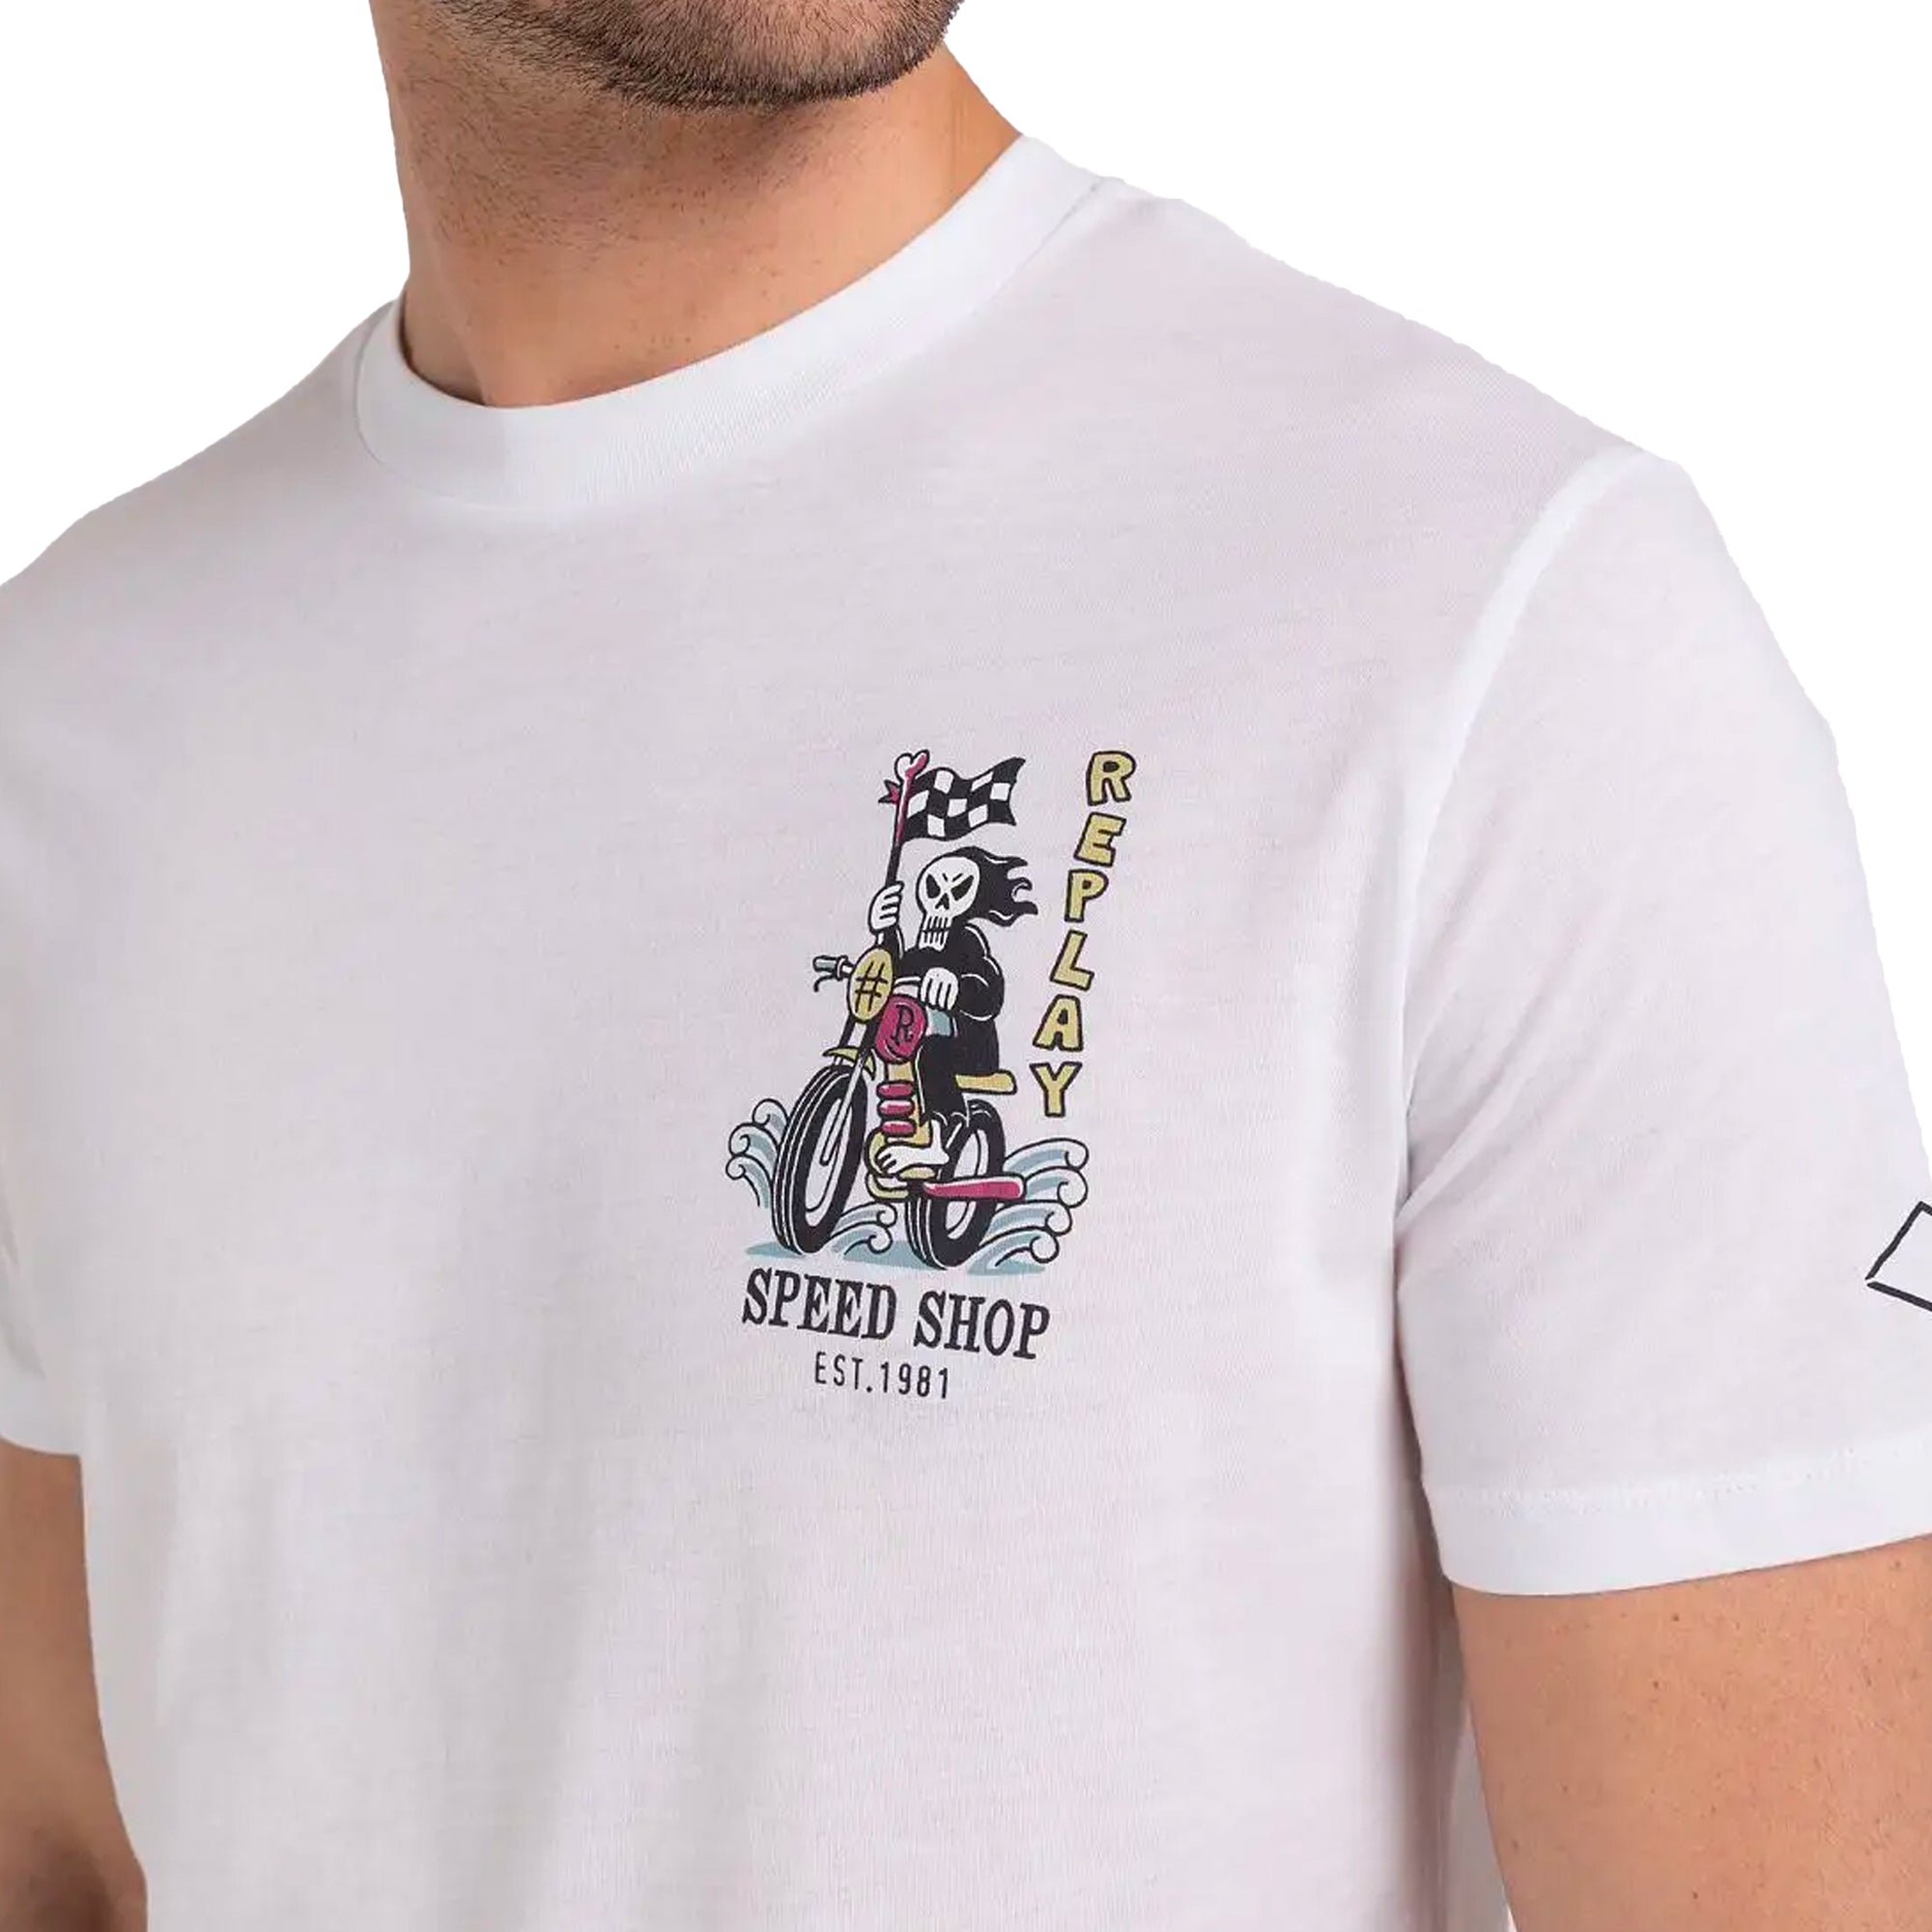 Replay Death Racer T-Shirt - White